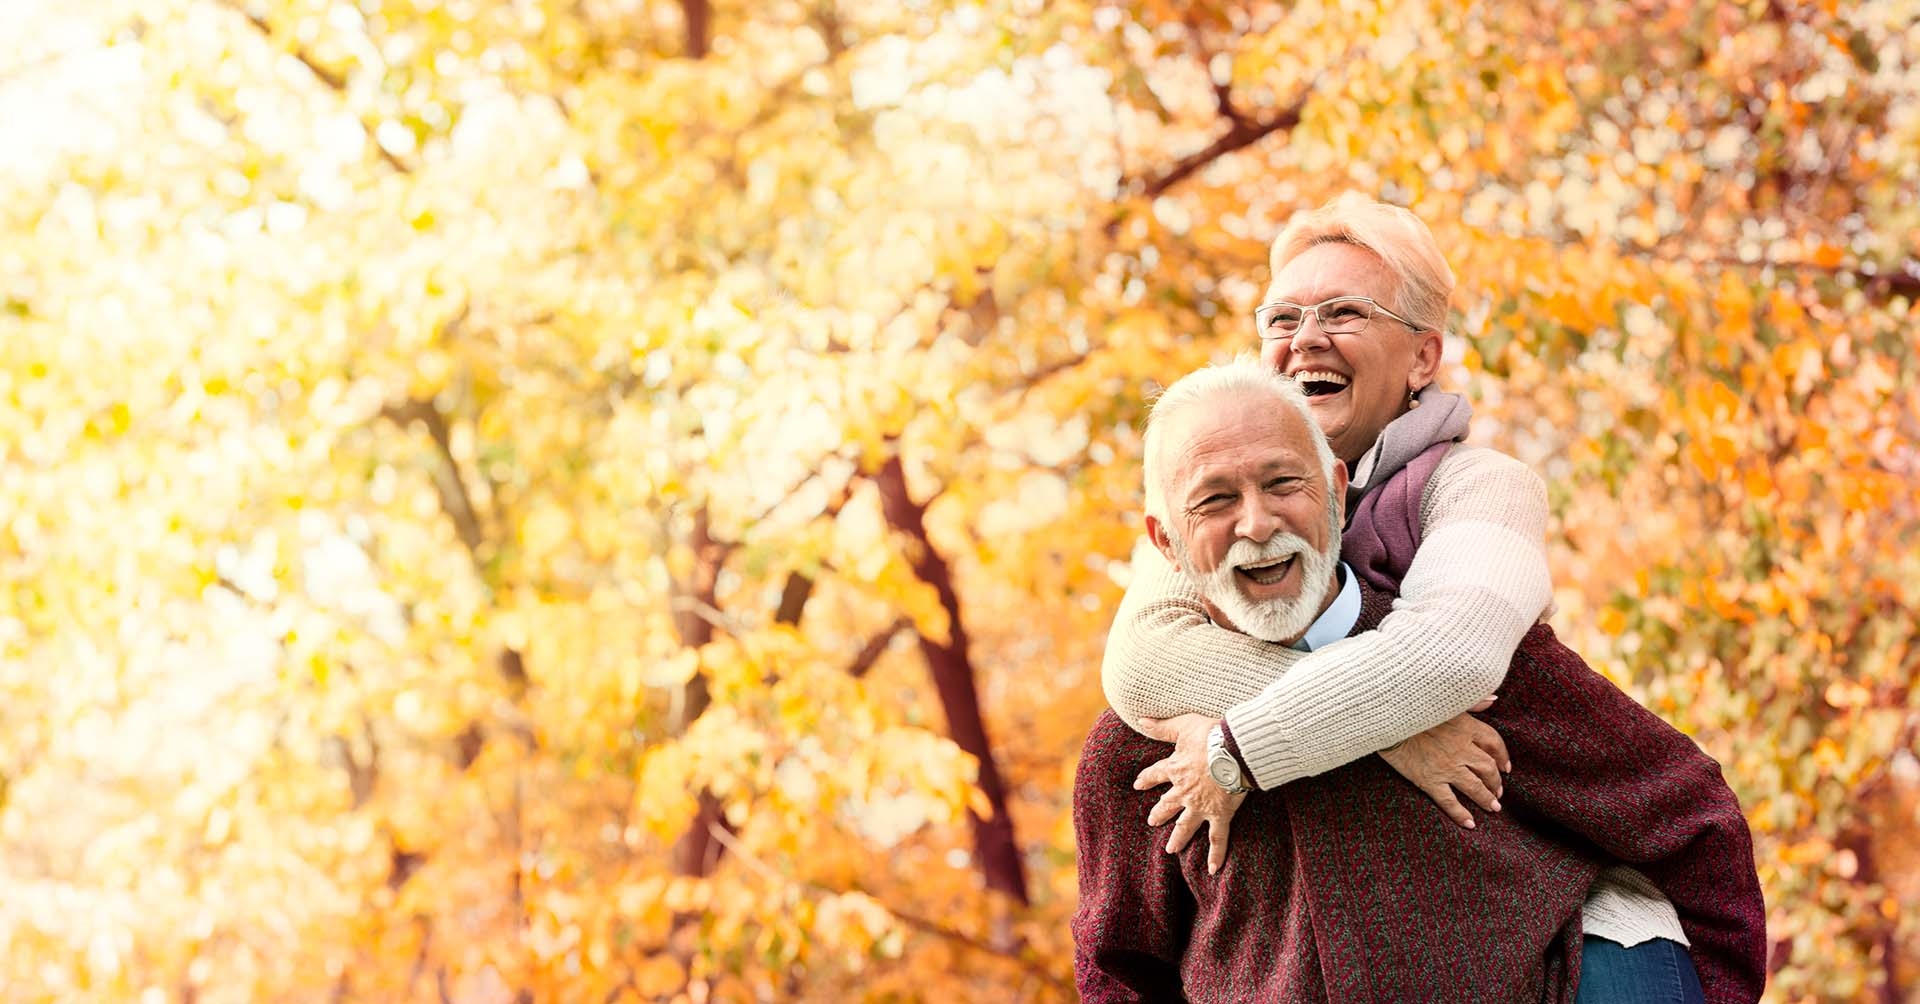 retired couple in front of trees with yellow leaves during fall